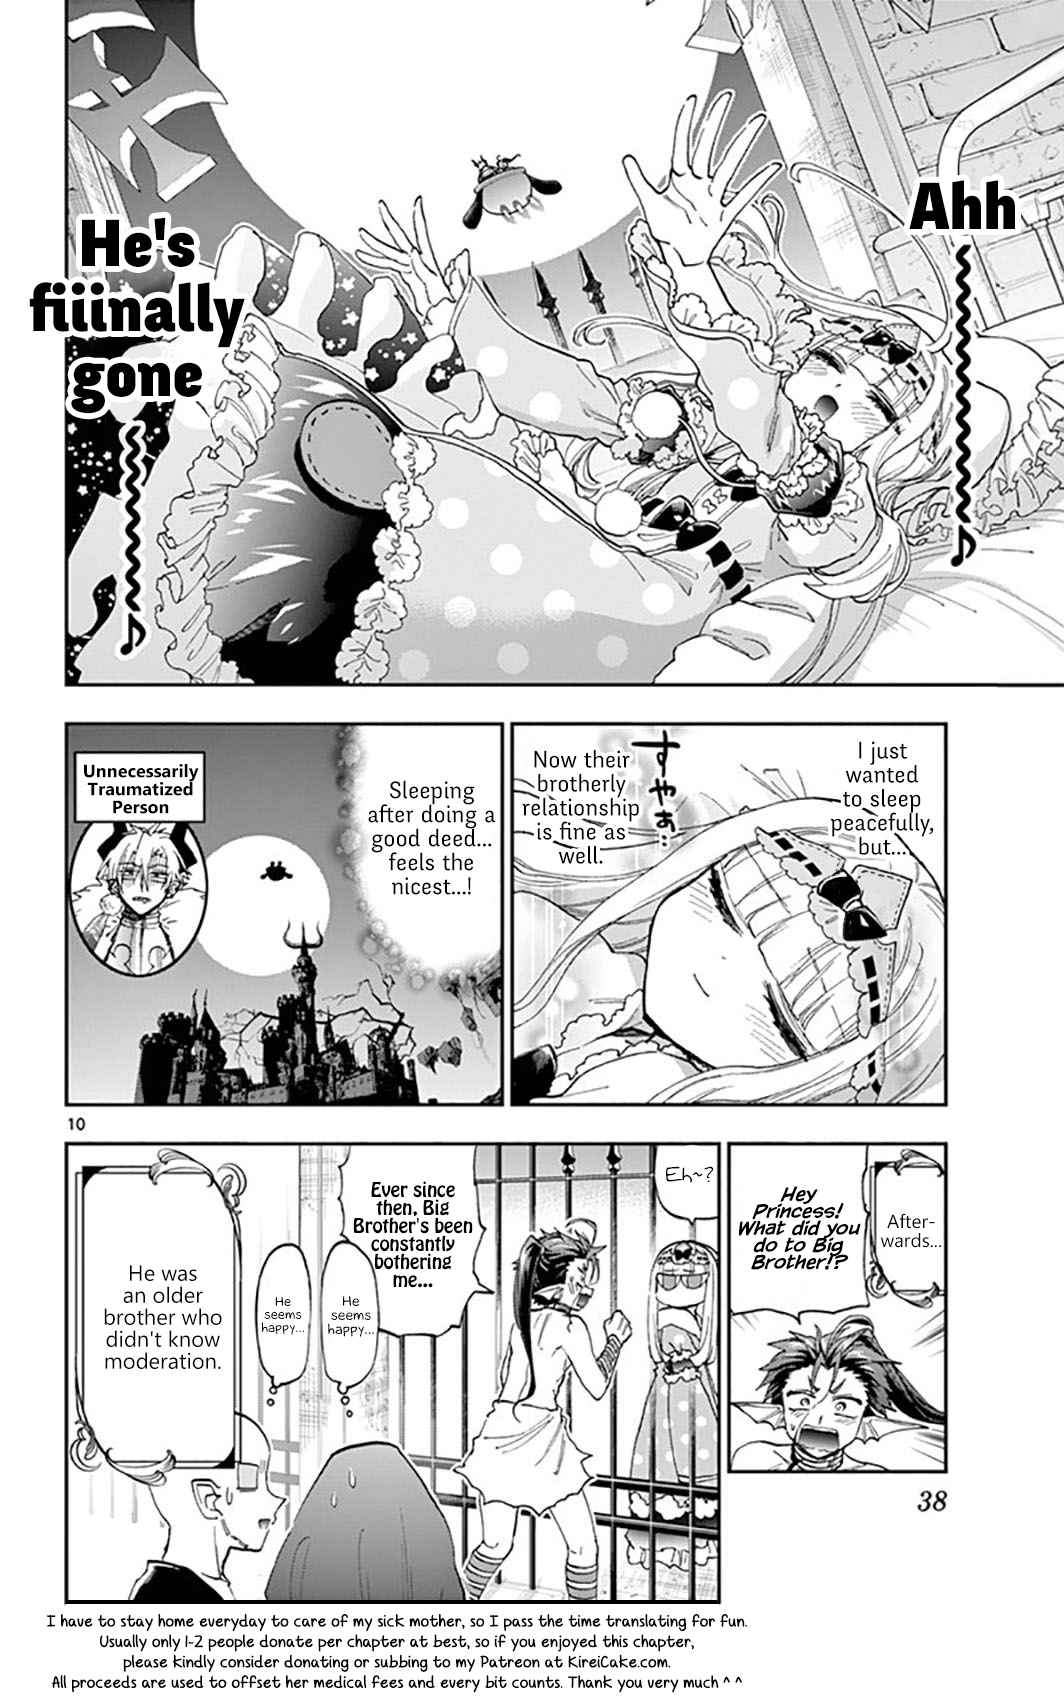 Maou jou de Oyasumi Vol. 12 Ch. 146 Fishing With an Object is Despicable!!